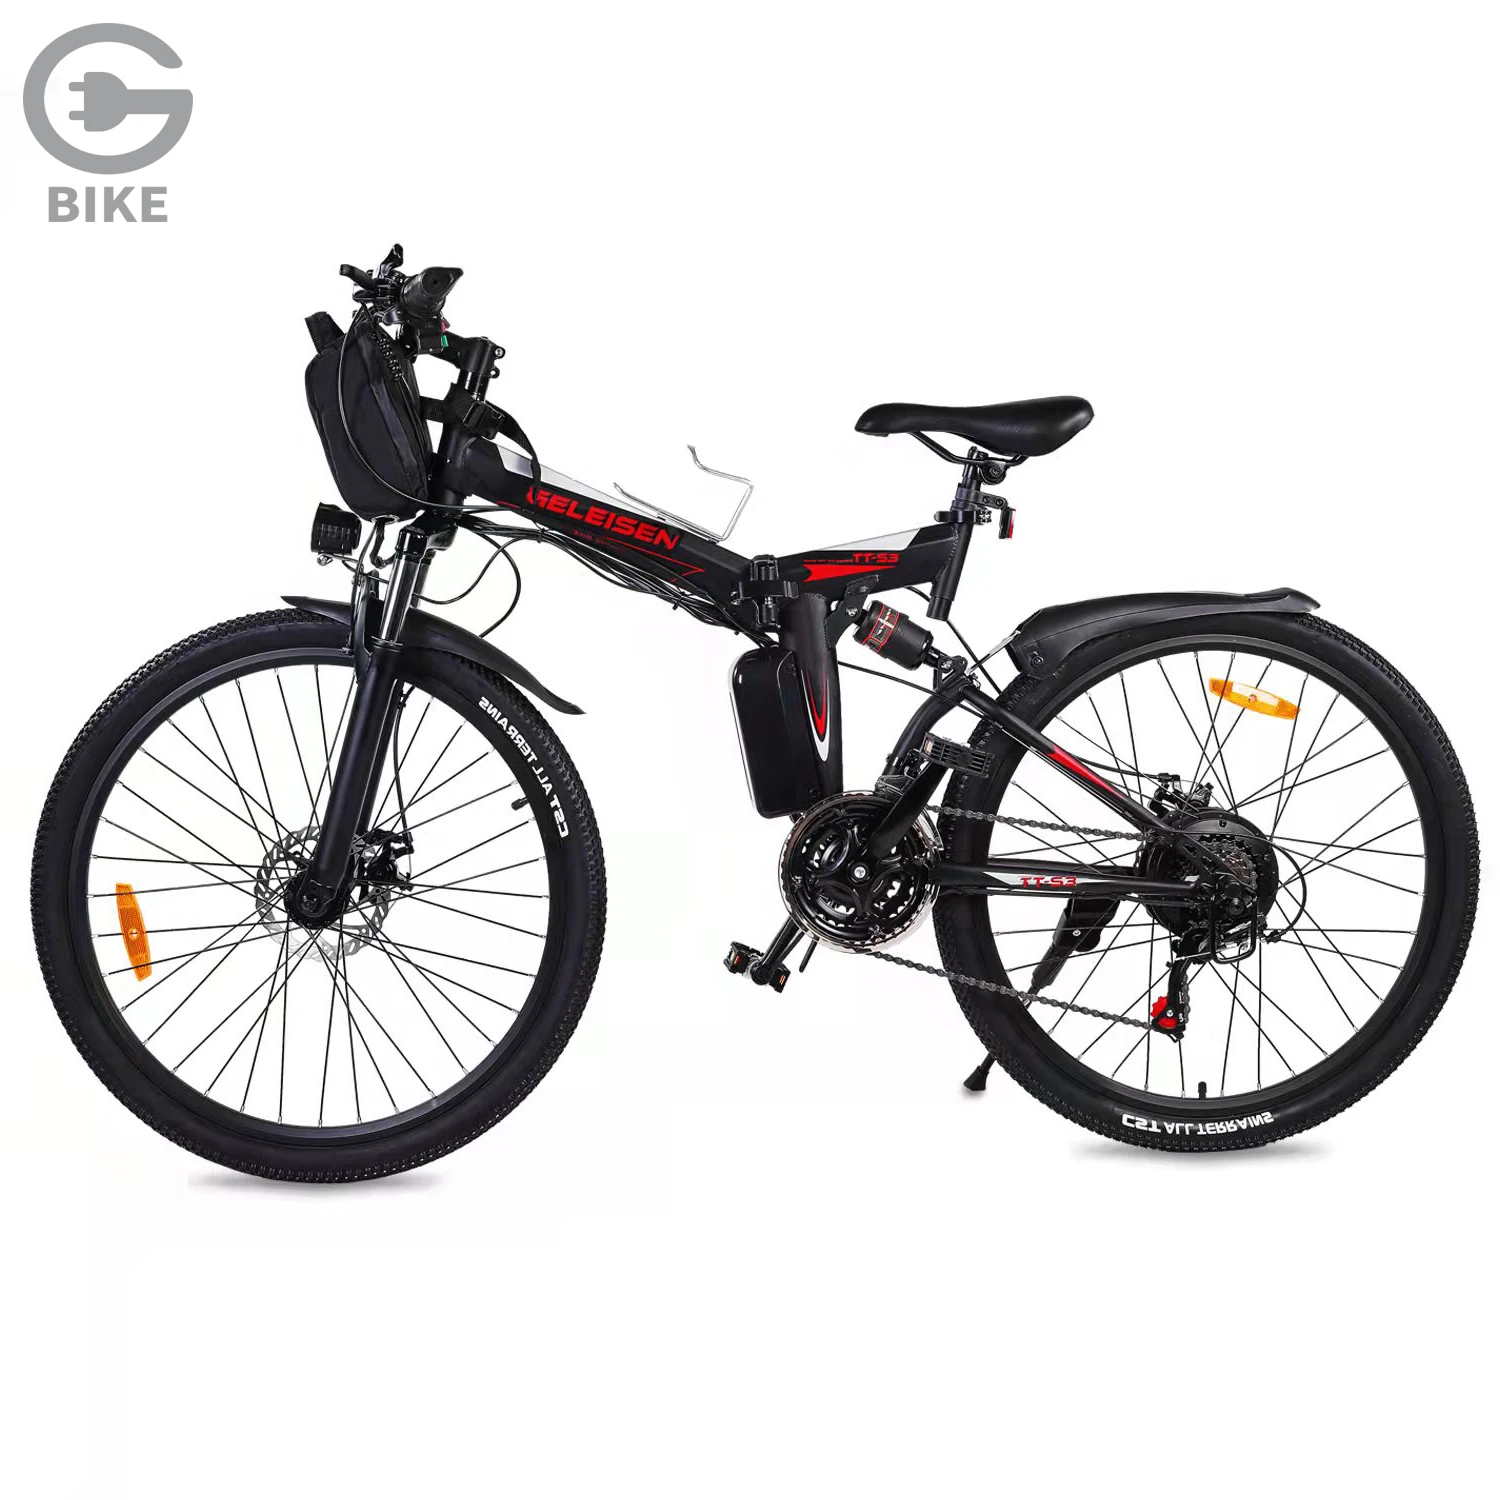 

GELEISEN S3 USA Warehouse Stock Cheap Ebike 26 Inch Adult Full Suspension Electric Mountain Bicycle Bike for Sale, Black